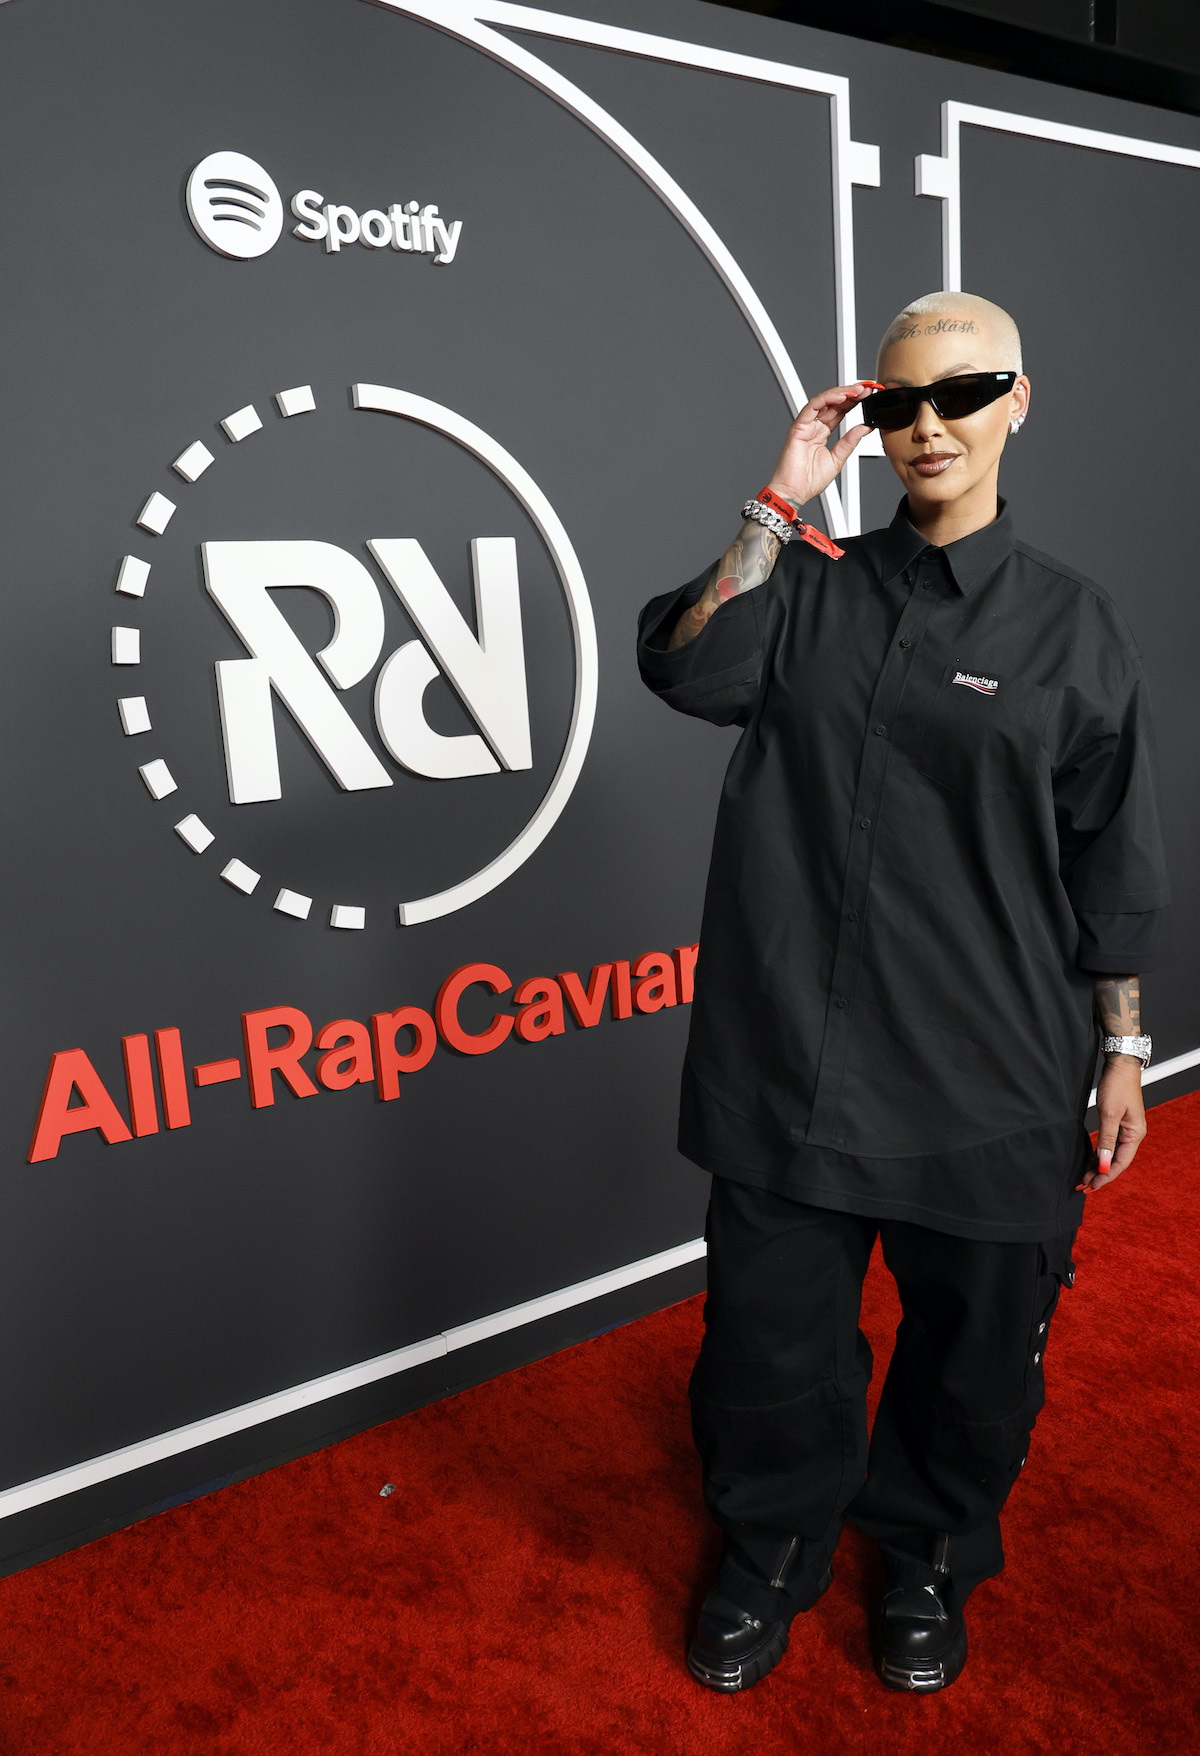 Amber Rose Attends Spotify's All Rap-Caviar Experience on June 23, 2022 in Los Angeles, California.